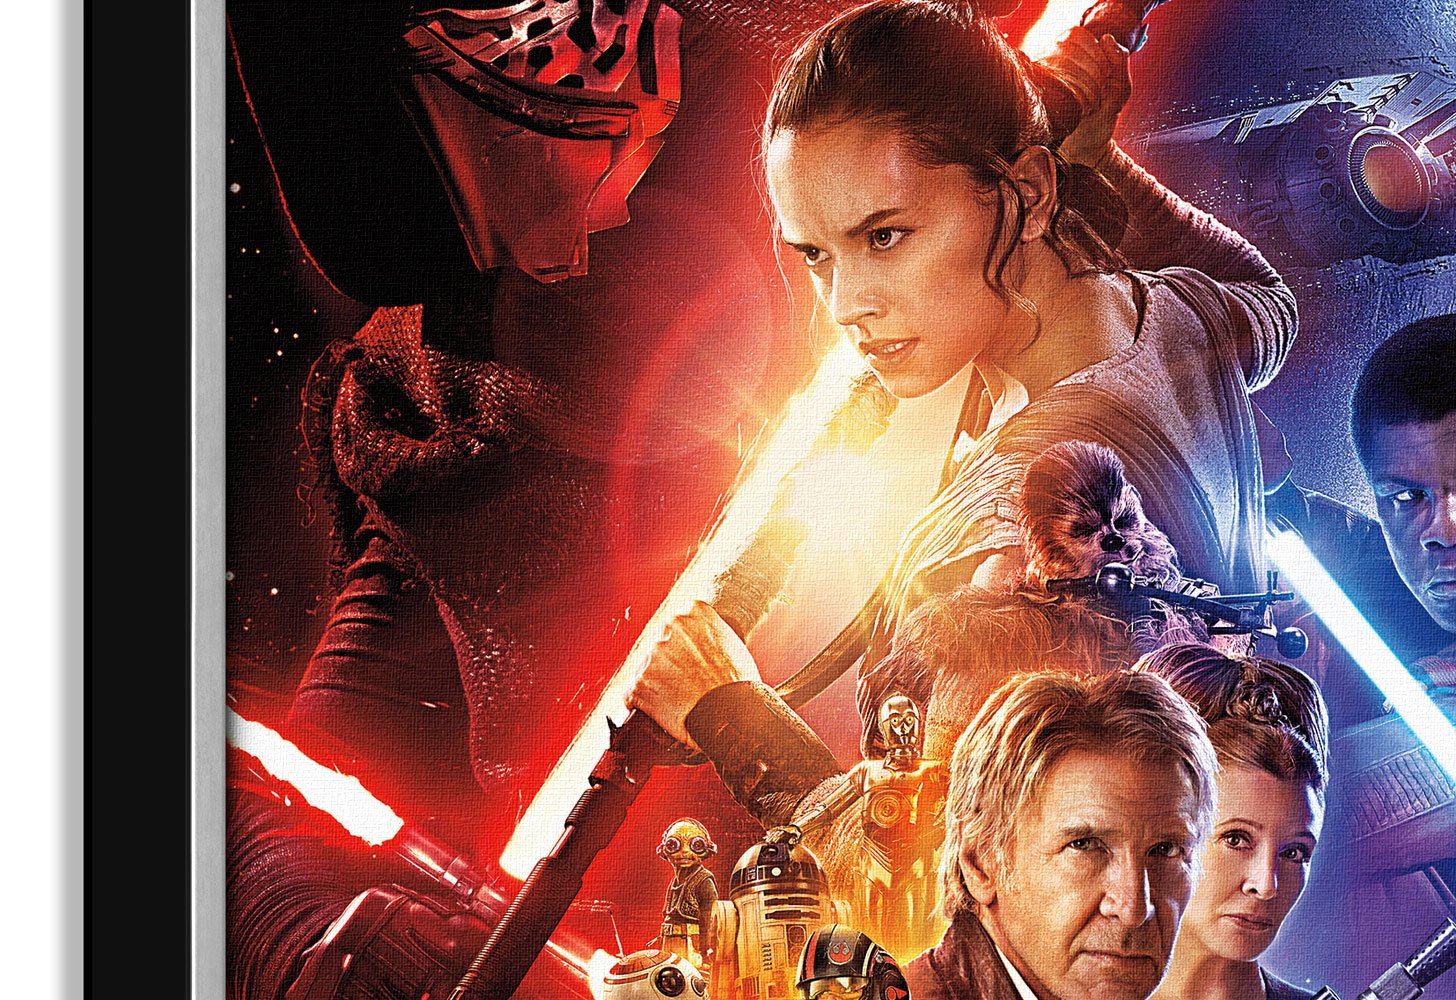 Star Wars Ep. VII: The Force Awakens for apple download